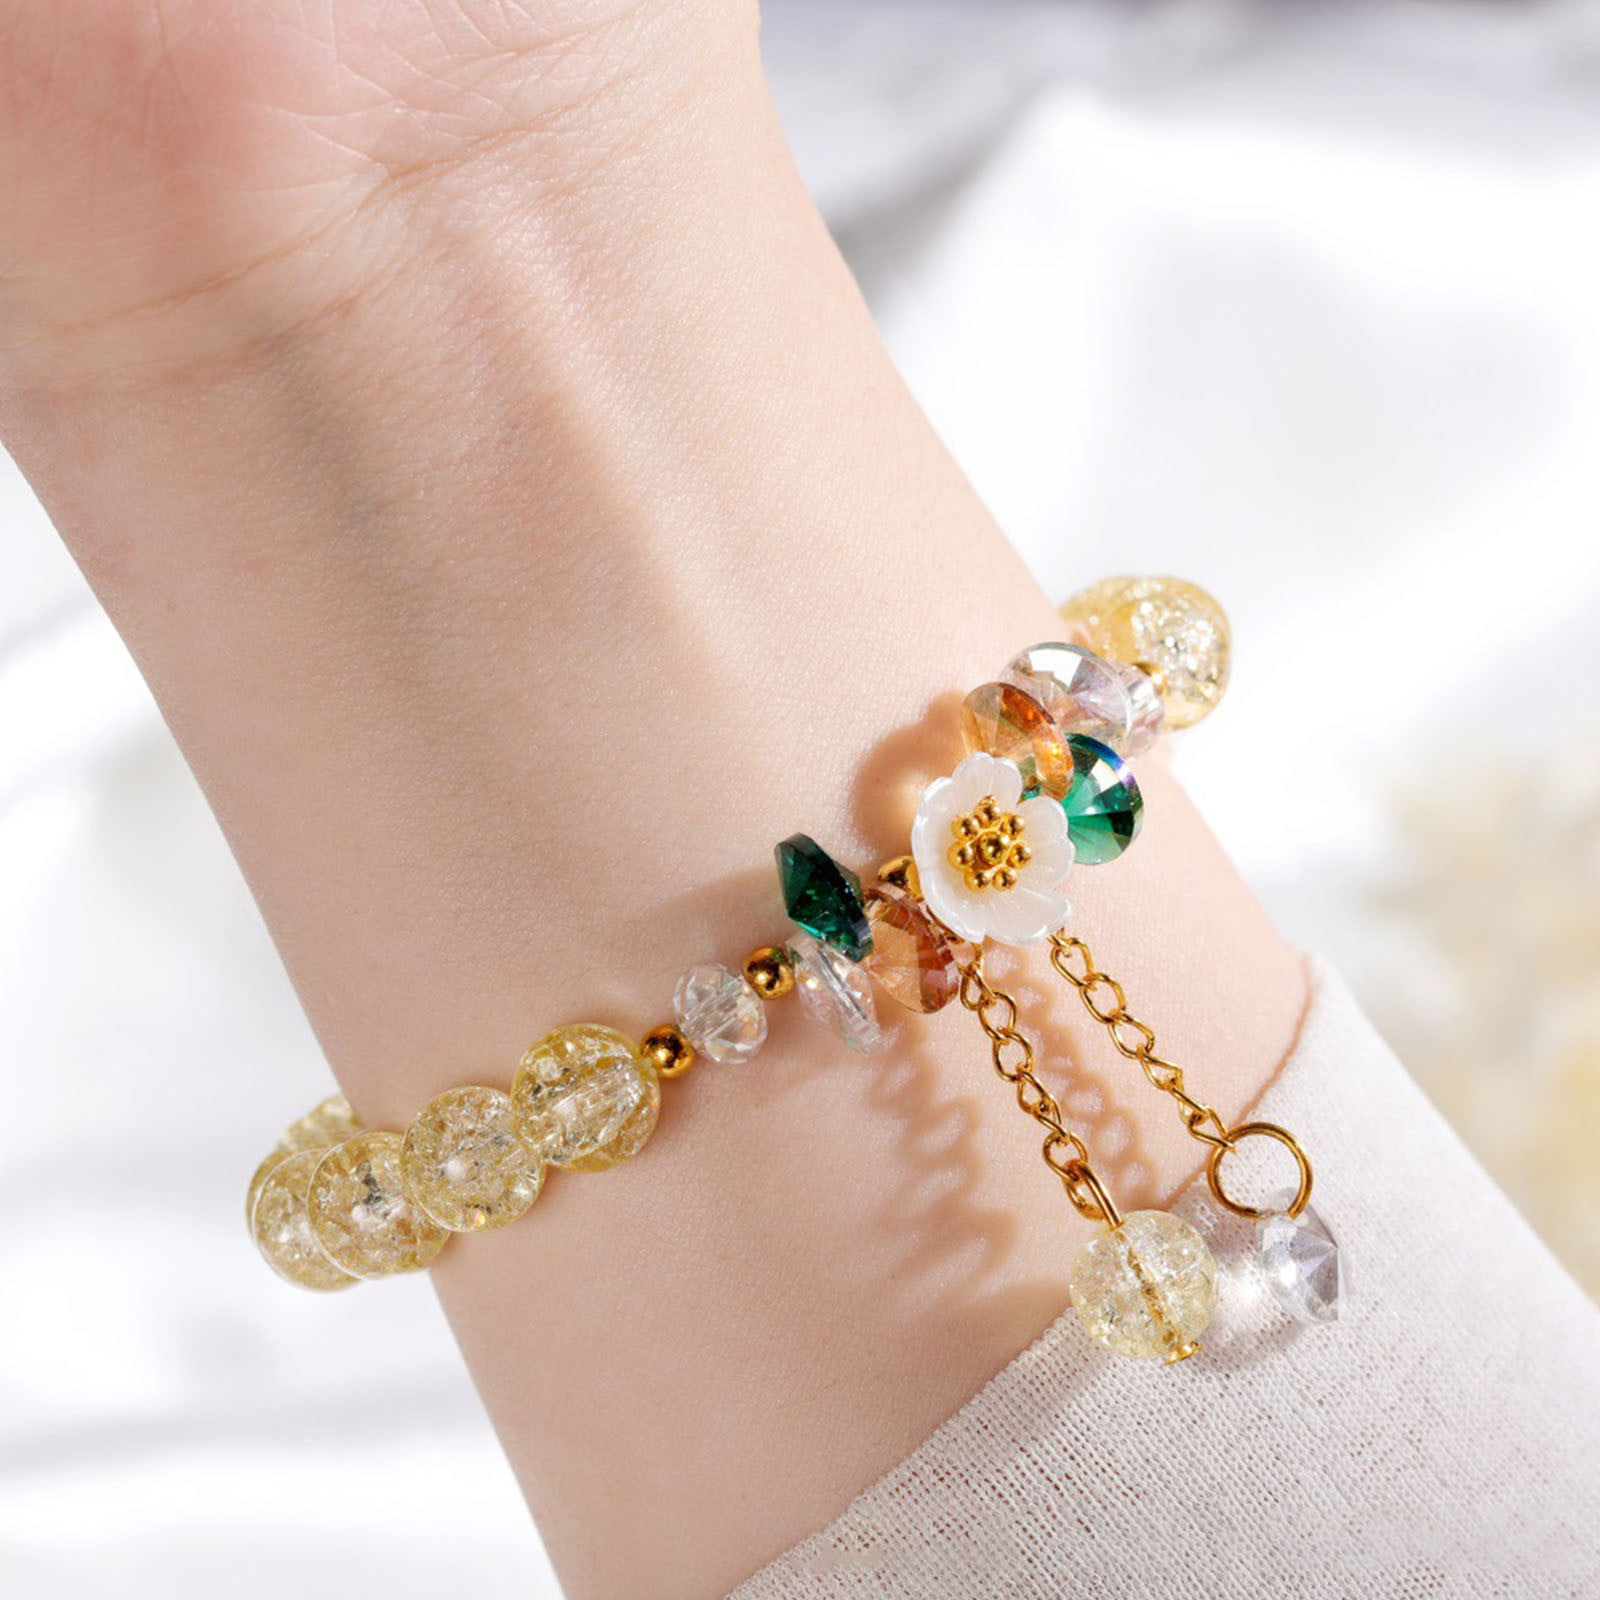 Vintage Flower Bangle Bracelets With Charms Link Bracelet With Resin Pearl  Beads And Bangles Fashionable Female Jewelry Accessory For Women And Girls  Perfect Gift For 2023 From Value222, $6.95 | DHgate.Com